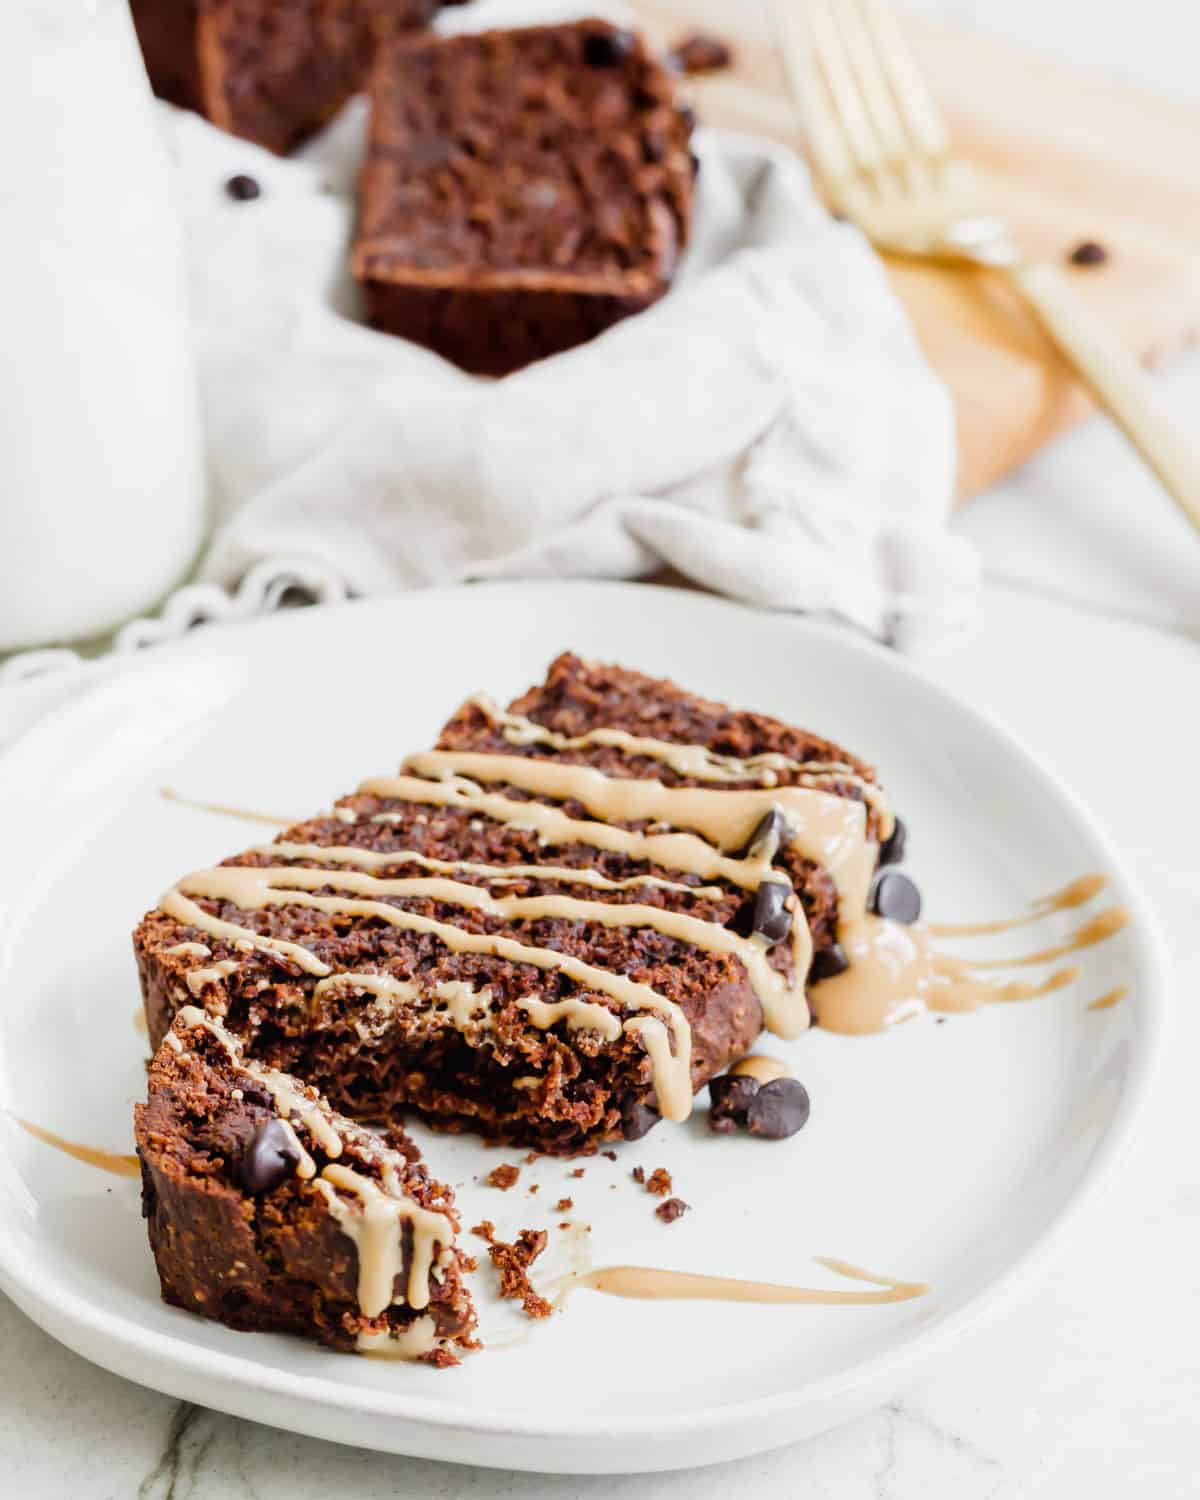 A slice of healthier chocolate banana bread on a plate drizzled in peanut butter with chocolate chips scattered around it.